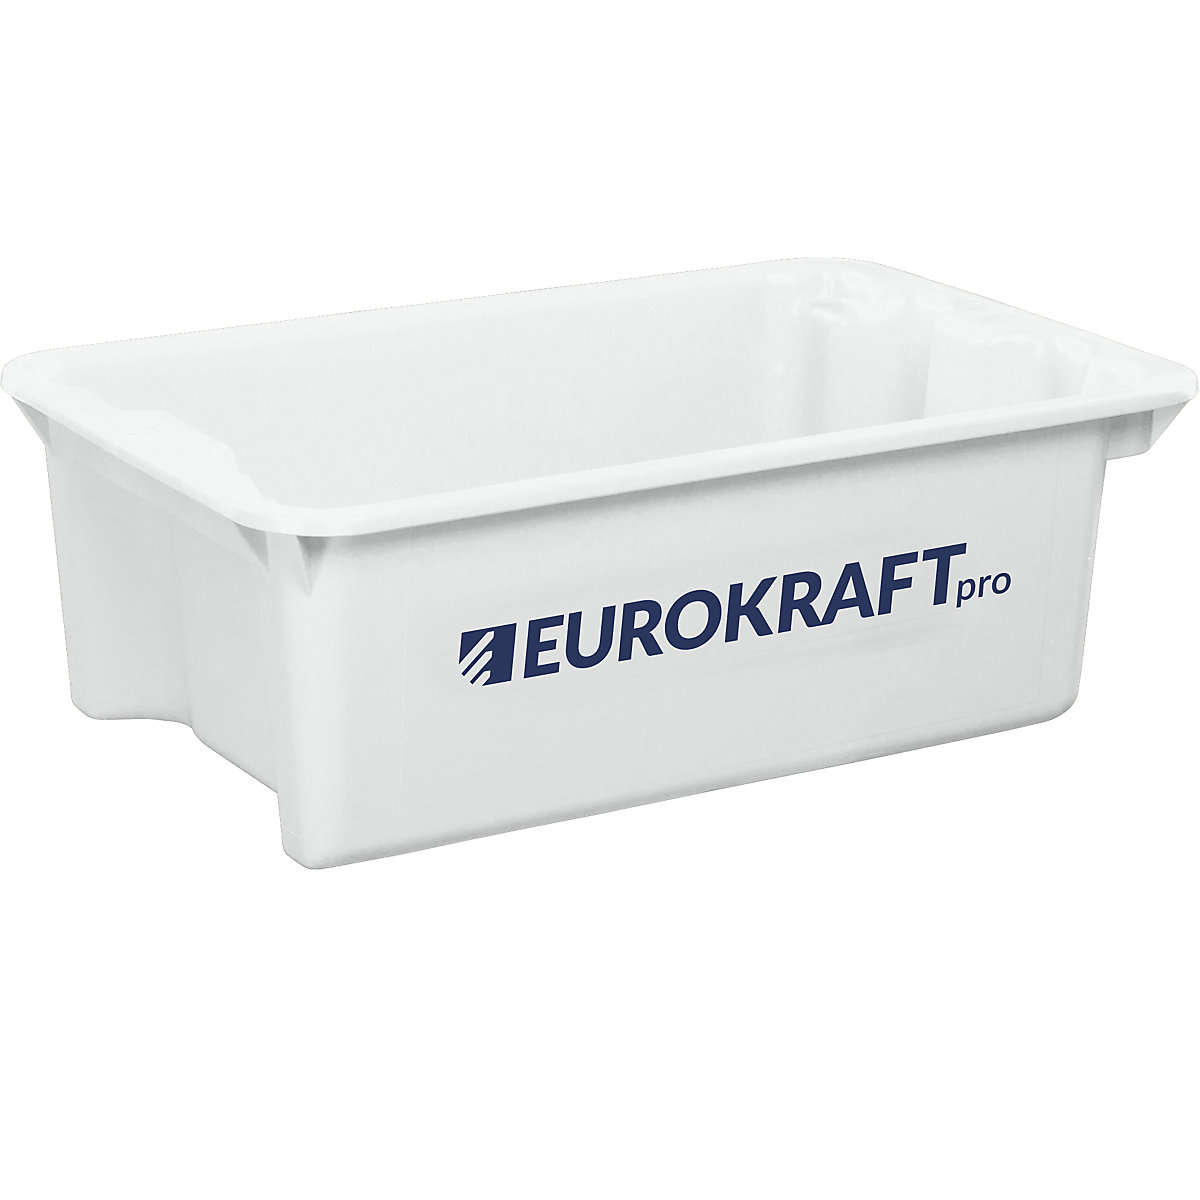 EUROKRAFTpro – Stack/nest container made of polypropylene suitable for foodstuffs, 34 l capacity, pack of 3, solid walls and base, natural colour